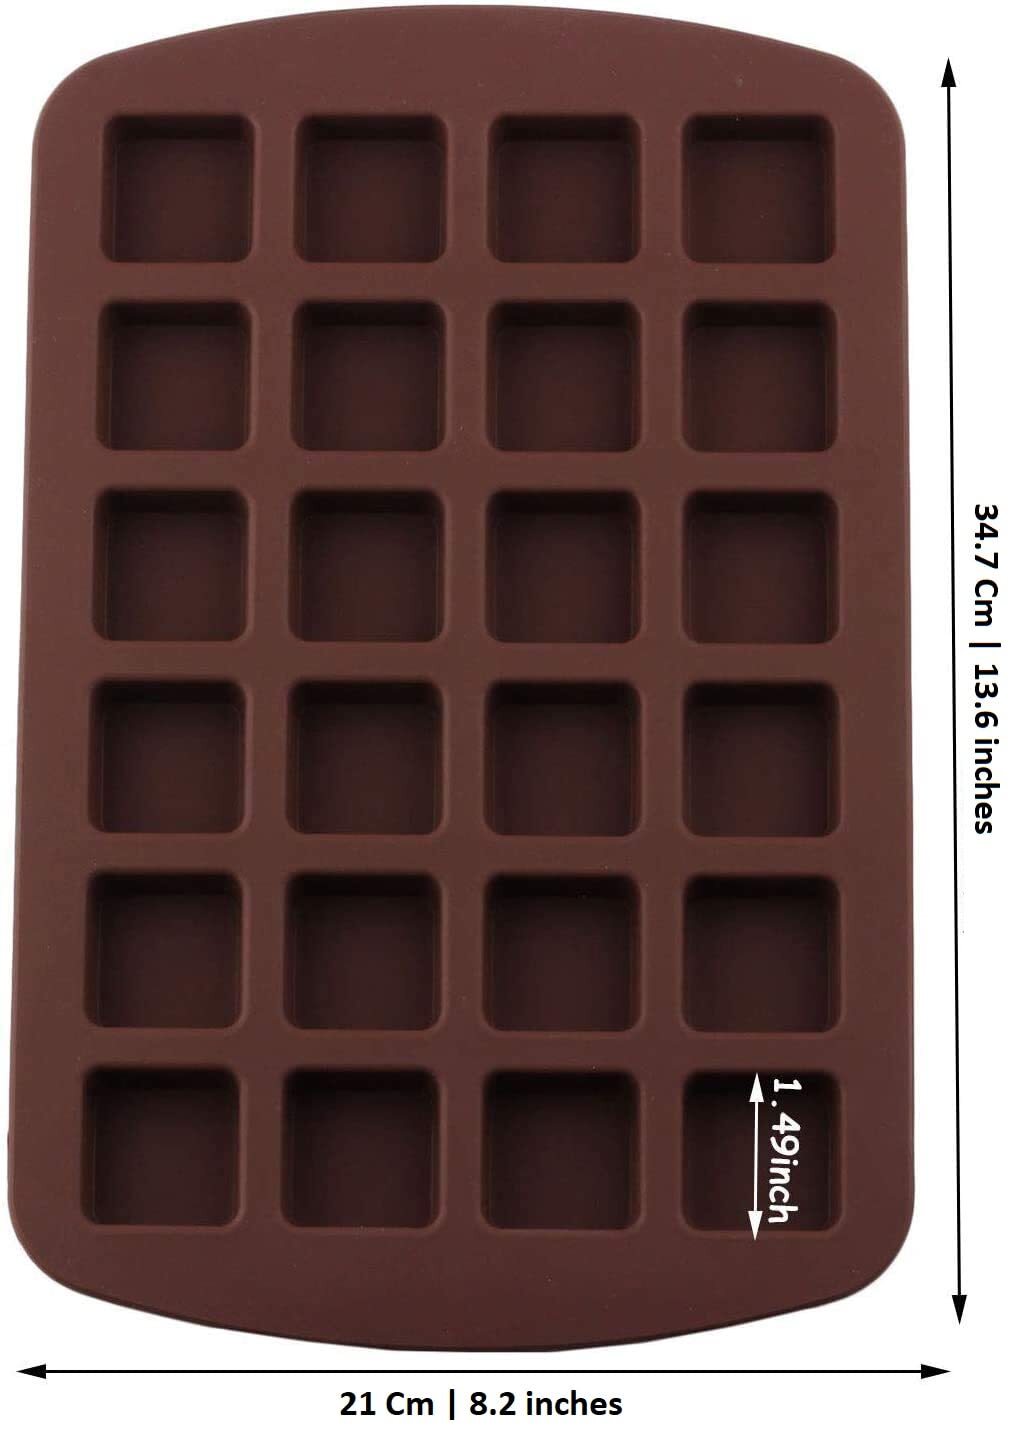 QDCFY Chocolate Molds (24 in 3 shapes),Chocolate Candy Silicone Mold 24-Pack with 3 Shapes, Baking Ice Cube Dropper Mold, Candy Silicone Mold, High and